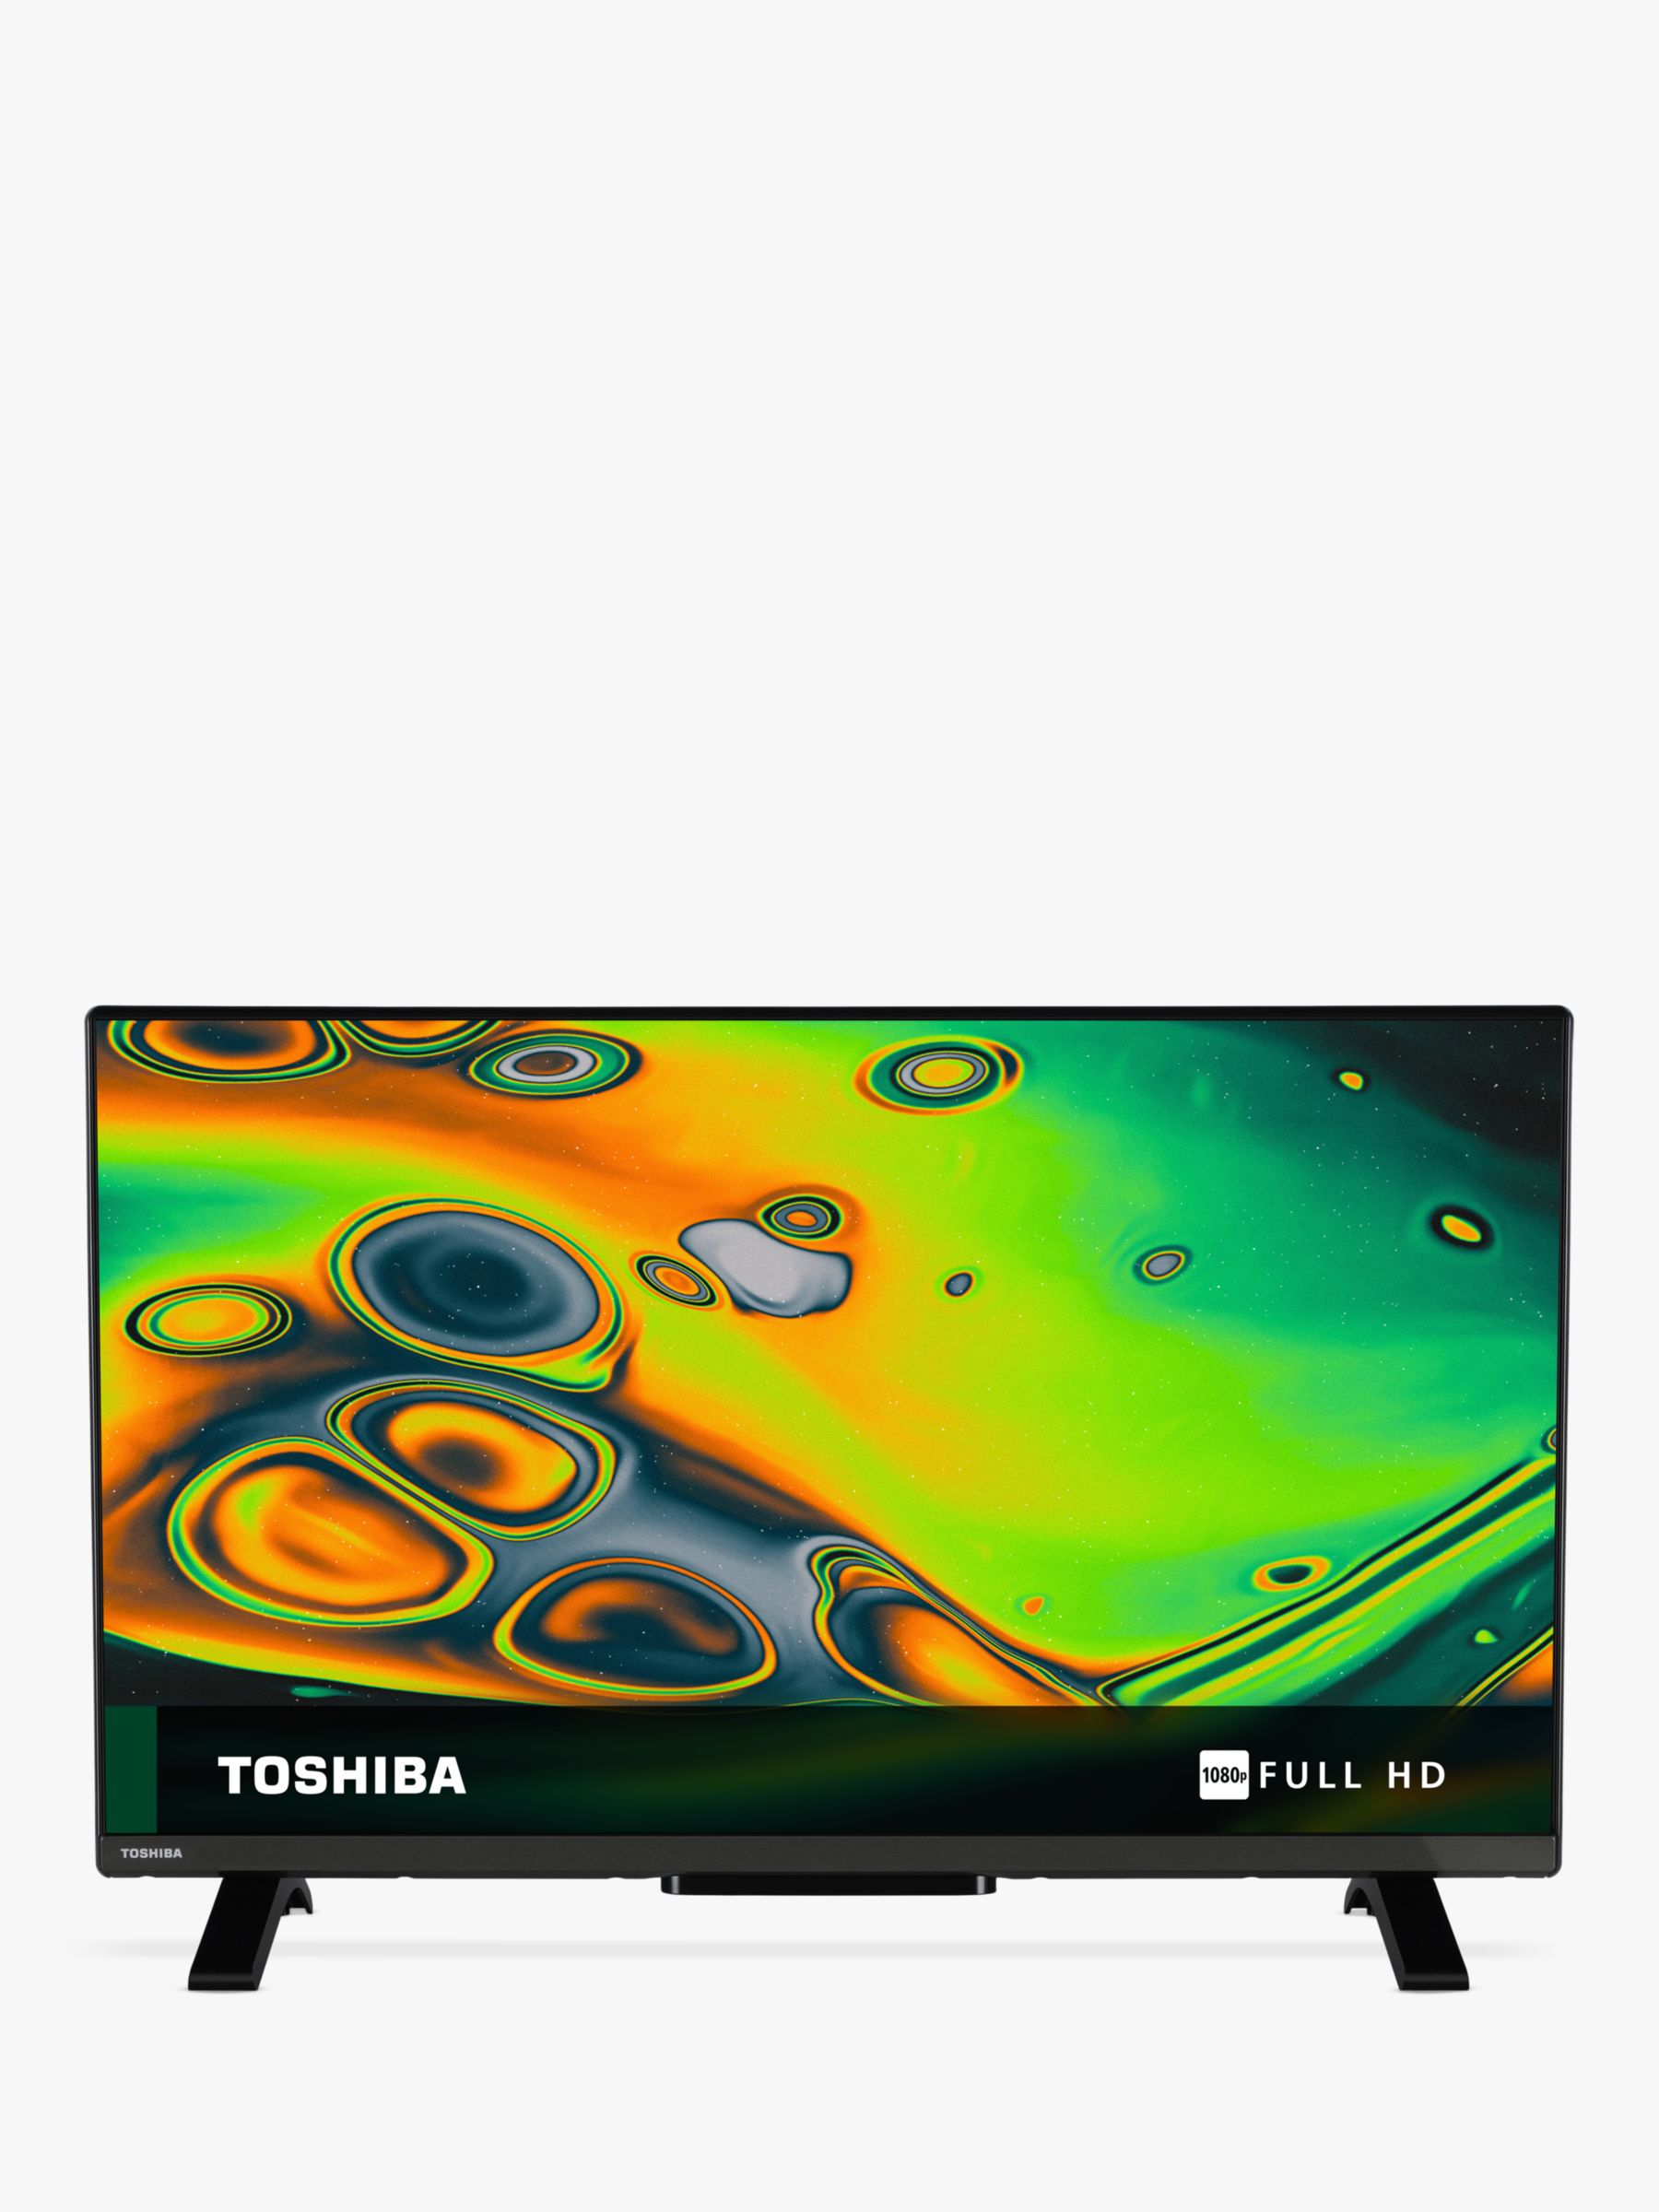 Toshiba 32LV2353DB (2023) LED HDR Full HD 1080p Smart TV, 32 inch with Freeview Play, Black